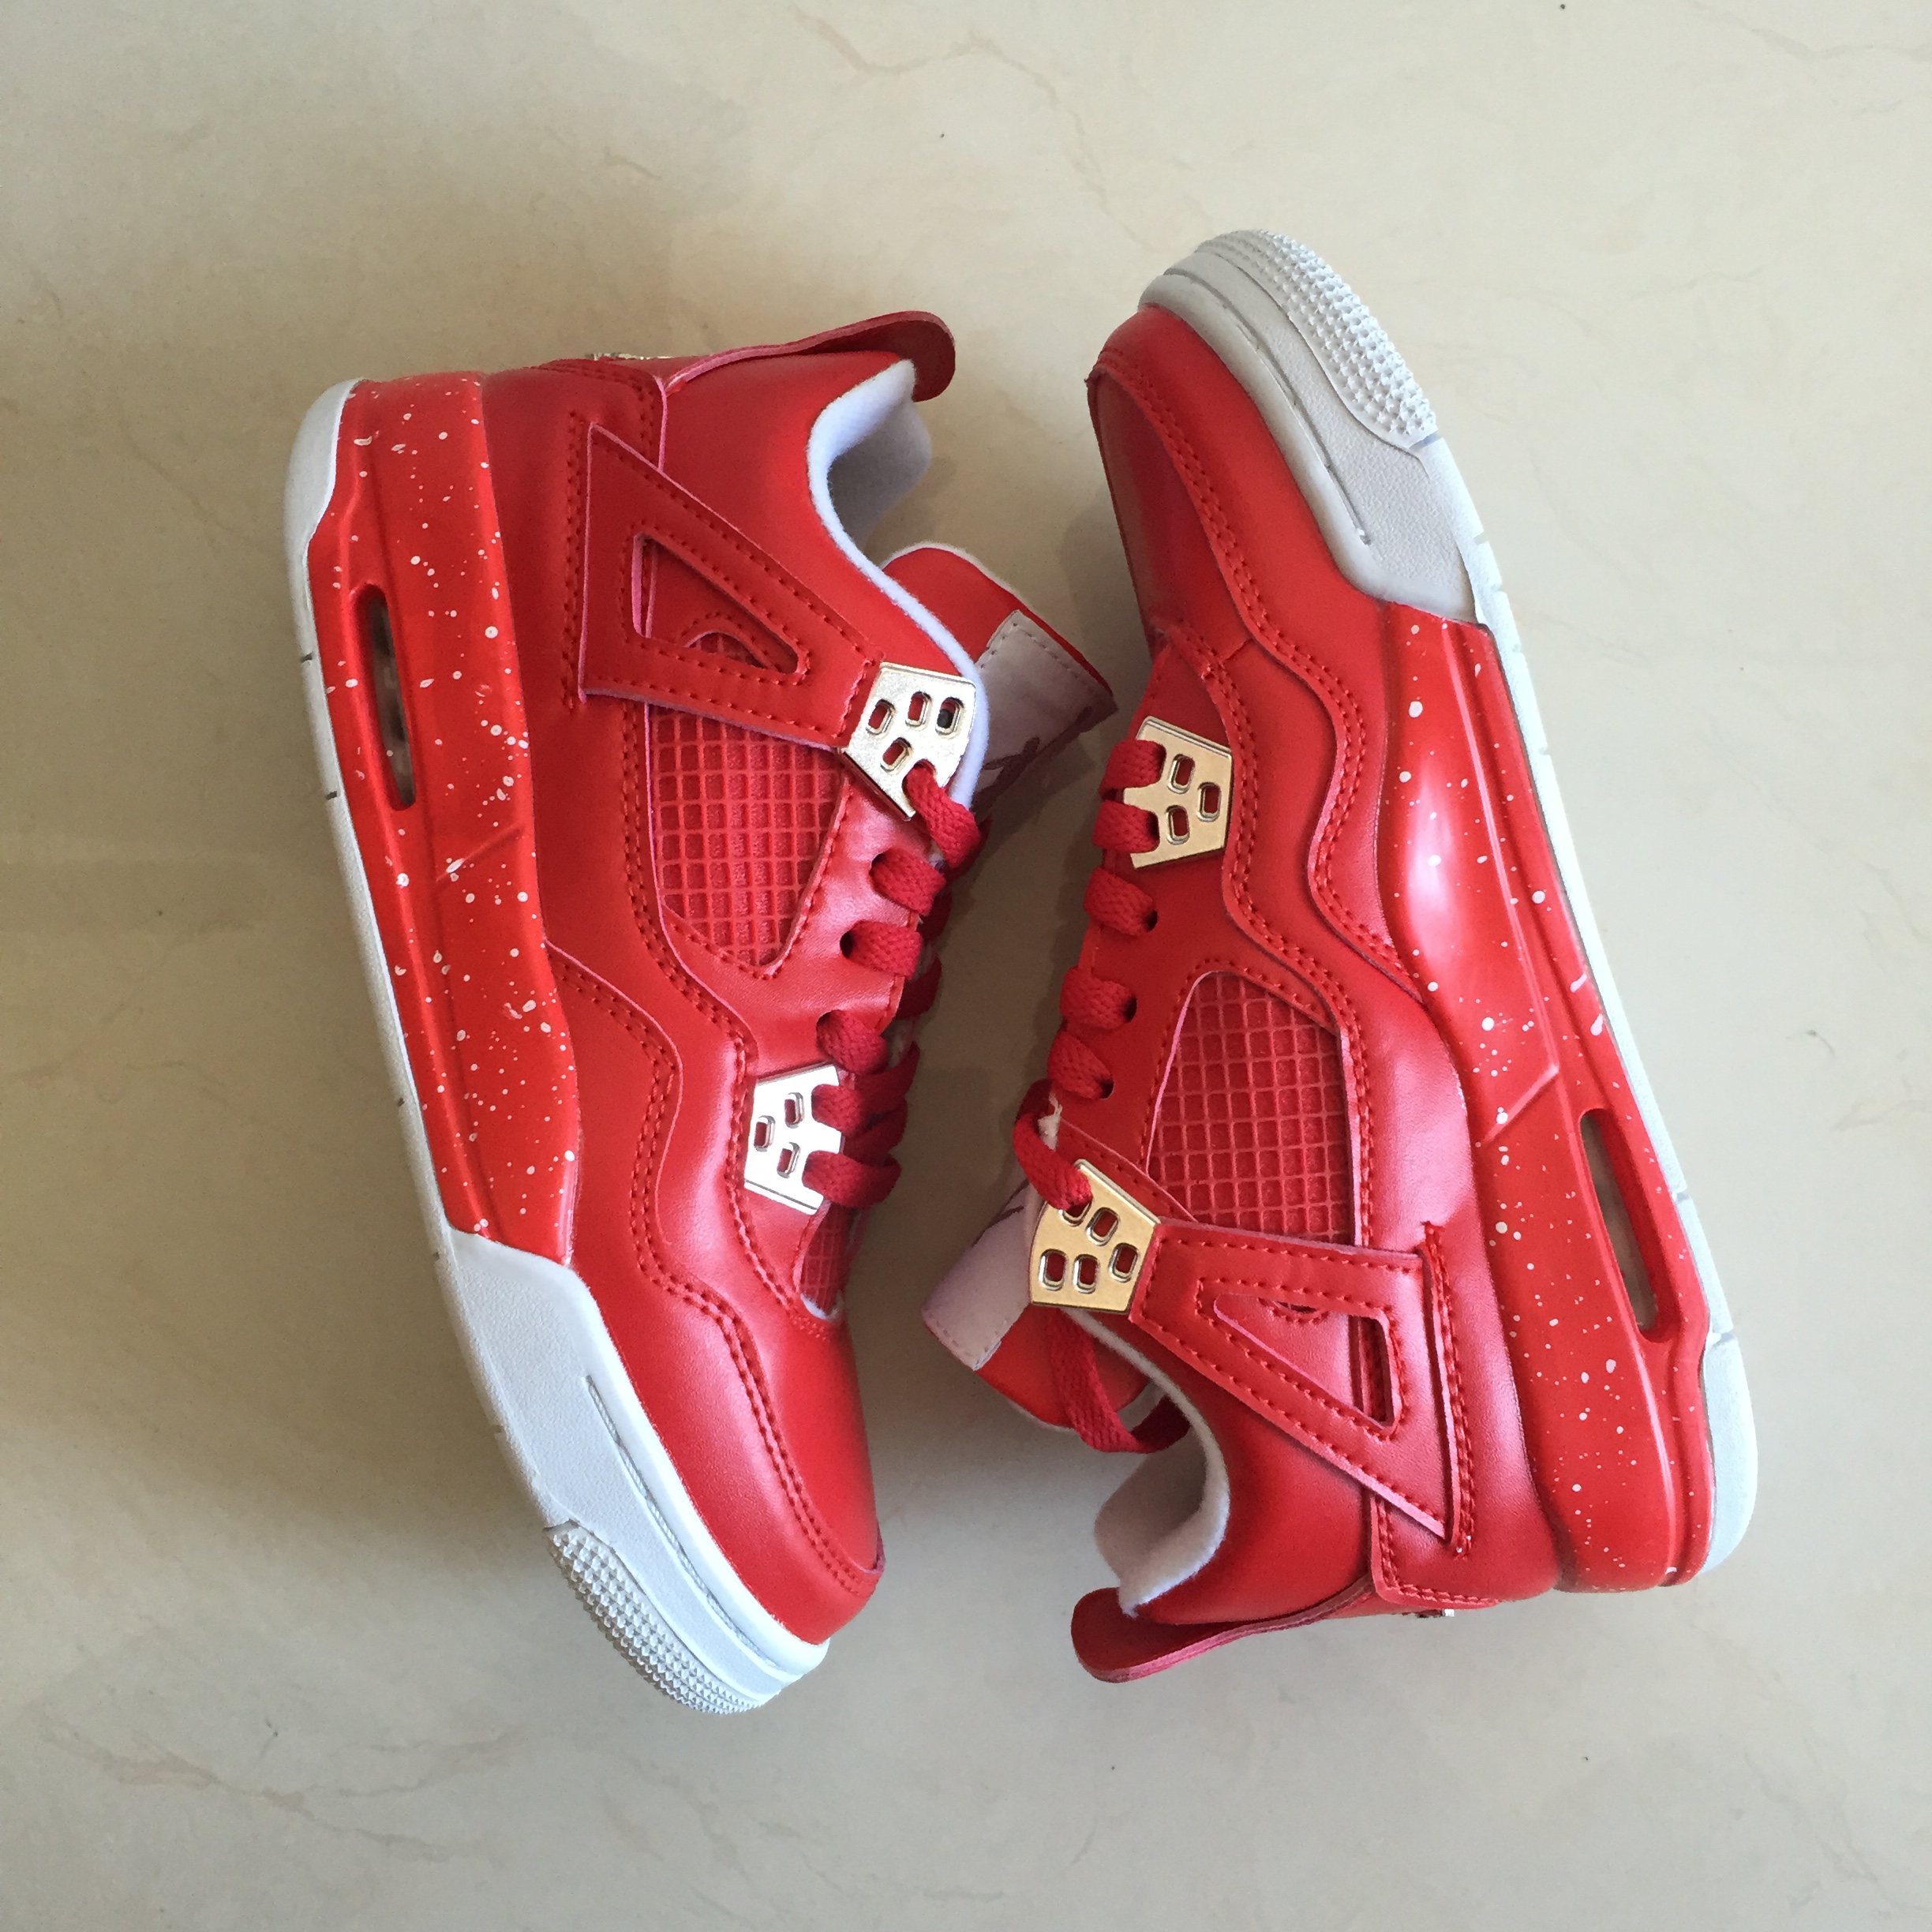 New Air Jordan 4 Spray Point All Red Shoes